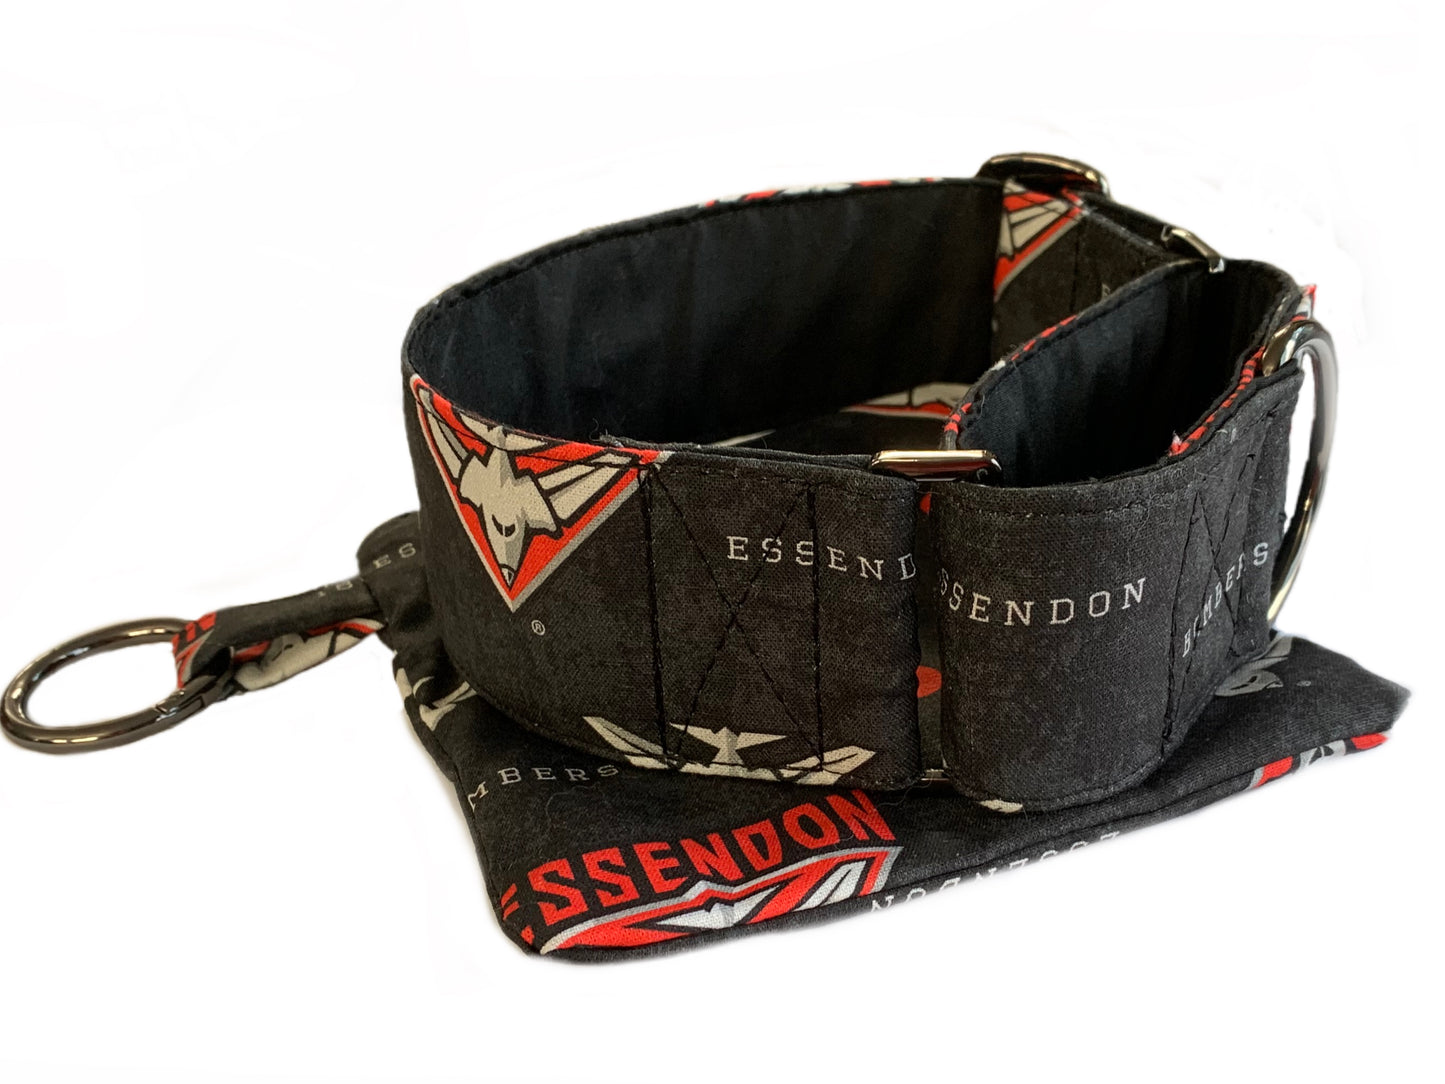 Bombers Martingale collar greyhound collar AFL Essendon Bombers footy cotton fabric